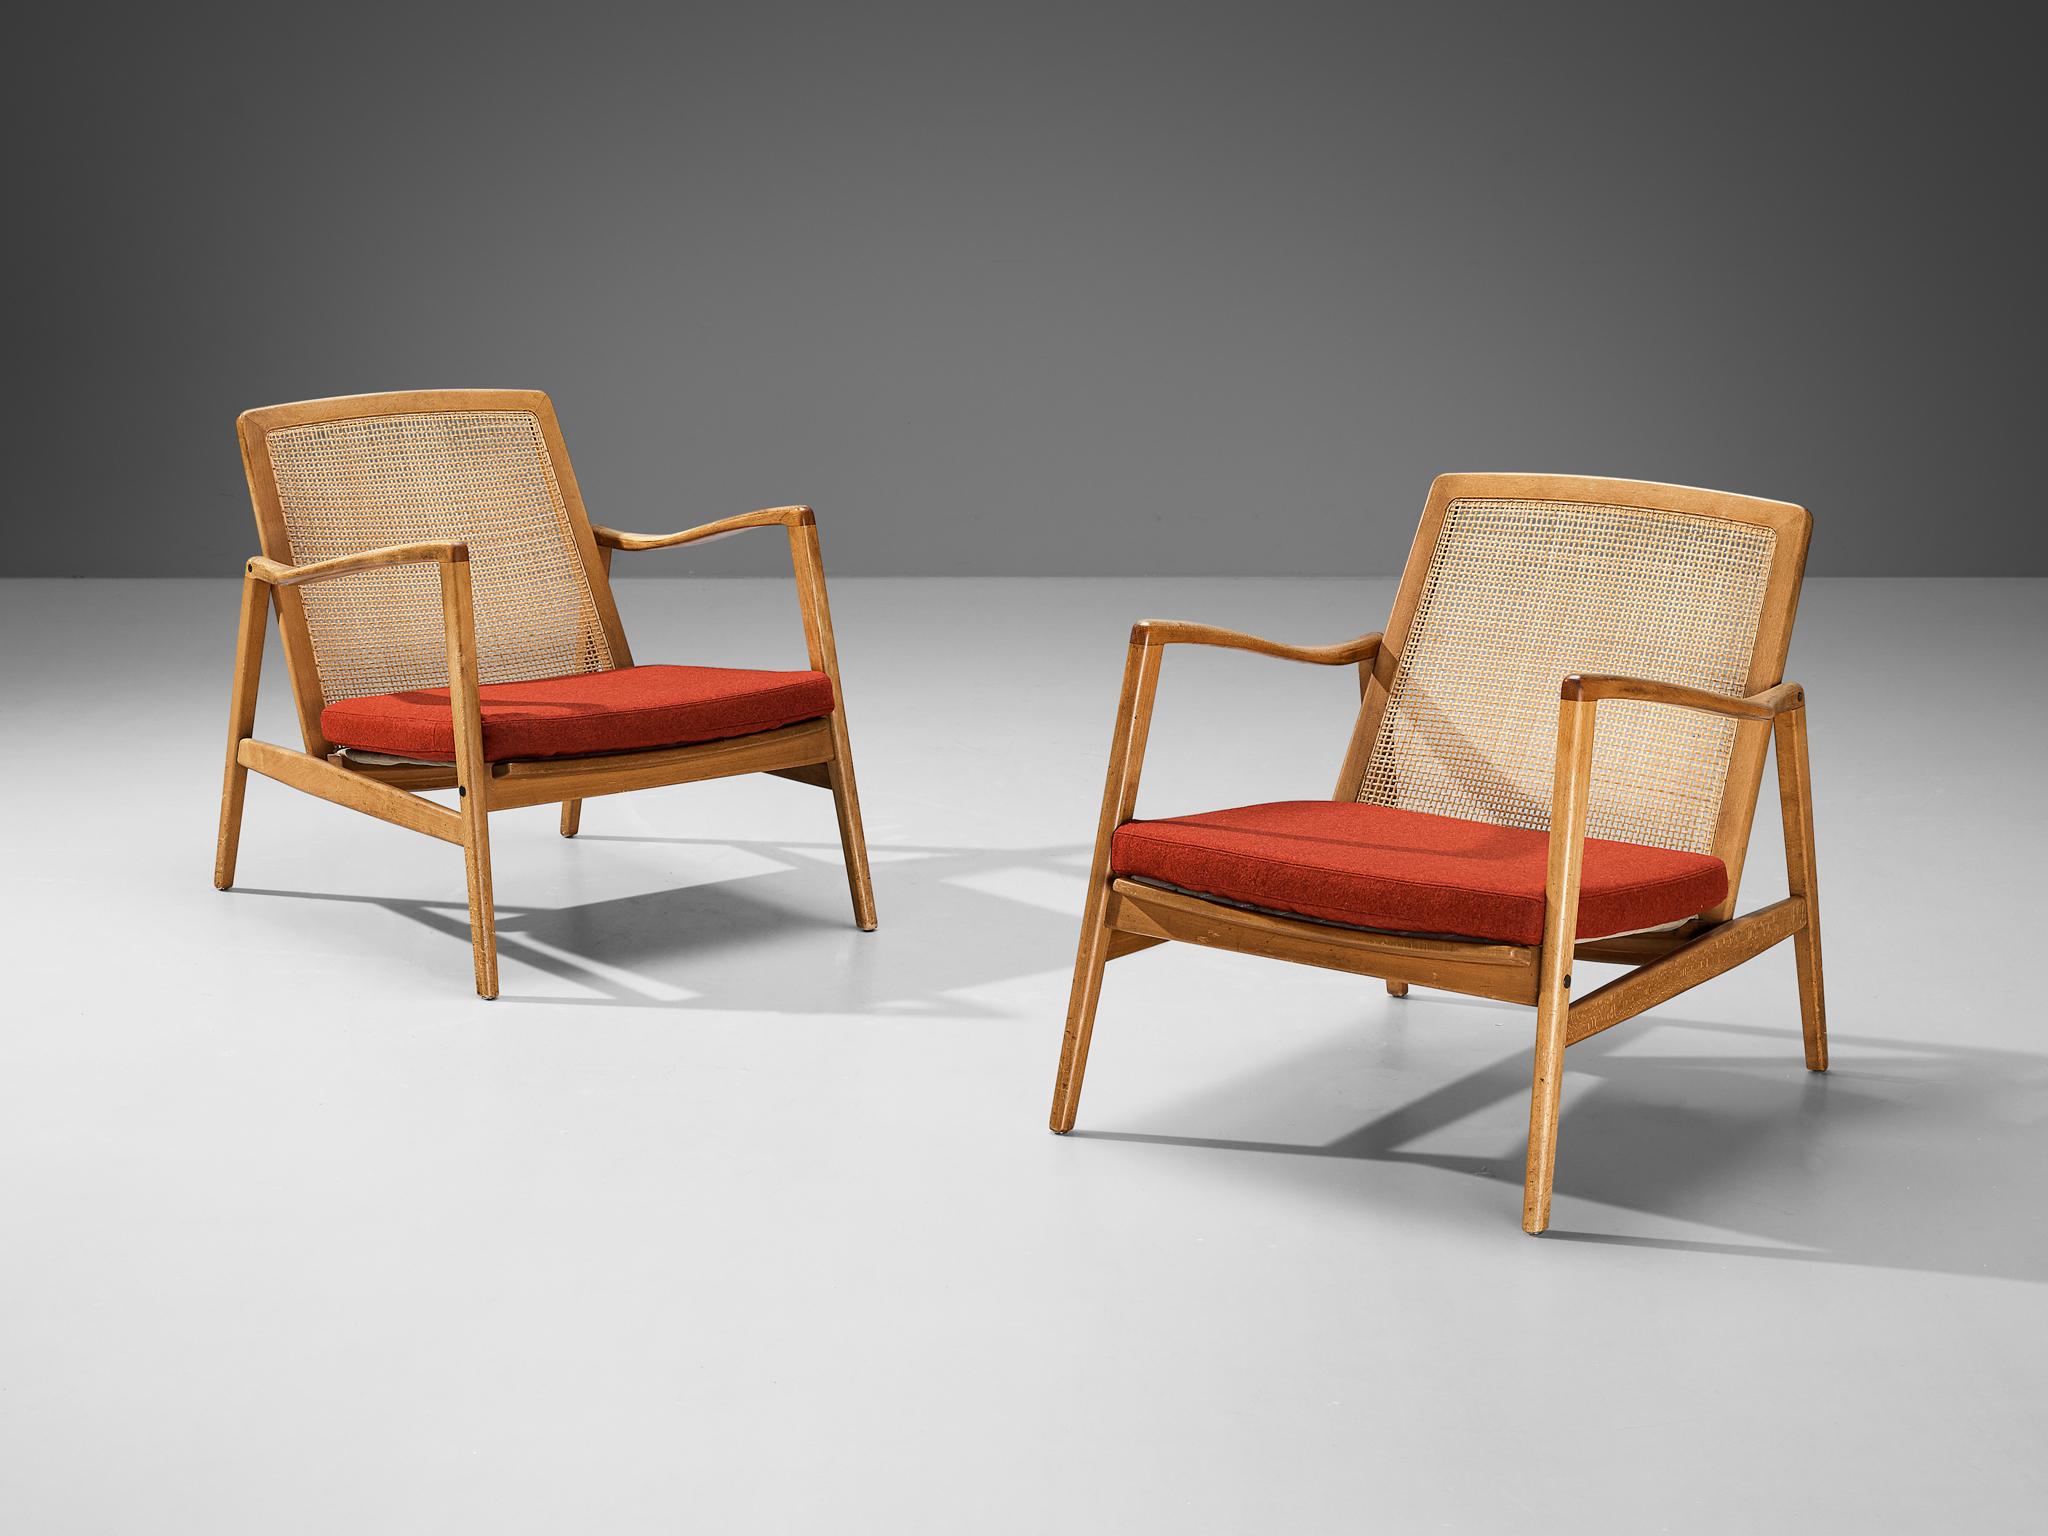 Hartmut Lohmeyer for Wilkhahn, pair of lounge chairs, walnut, beech, cane, fabric, Germany, 1956

These organically shaped lounge chairs by Hartmut Lohmeyer showcase a wide open wooden frame with a gentle tilt in the back, adorned with cane. The